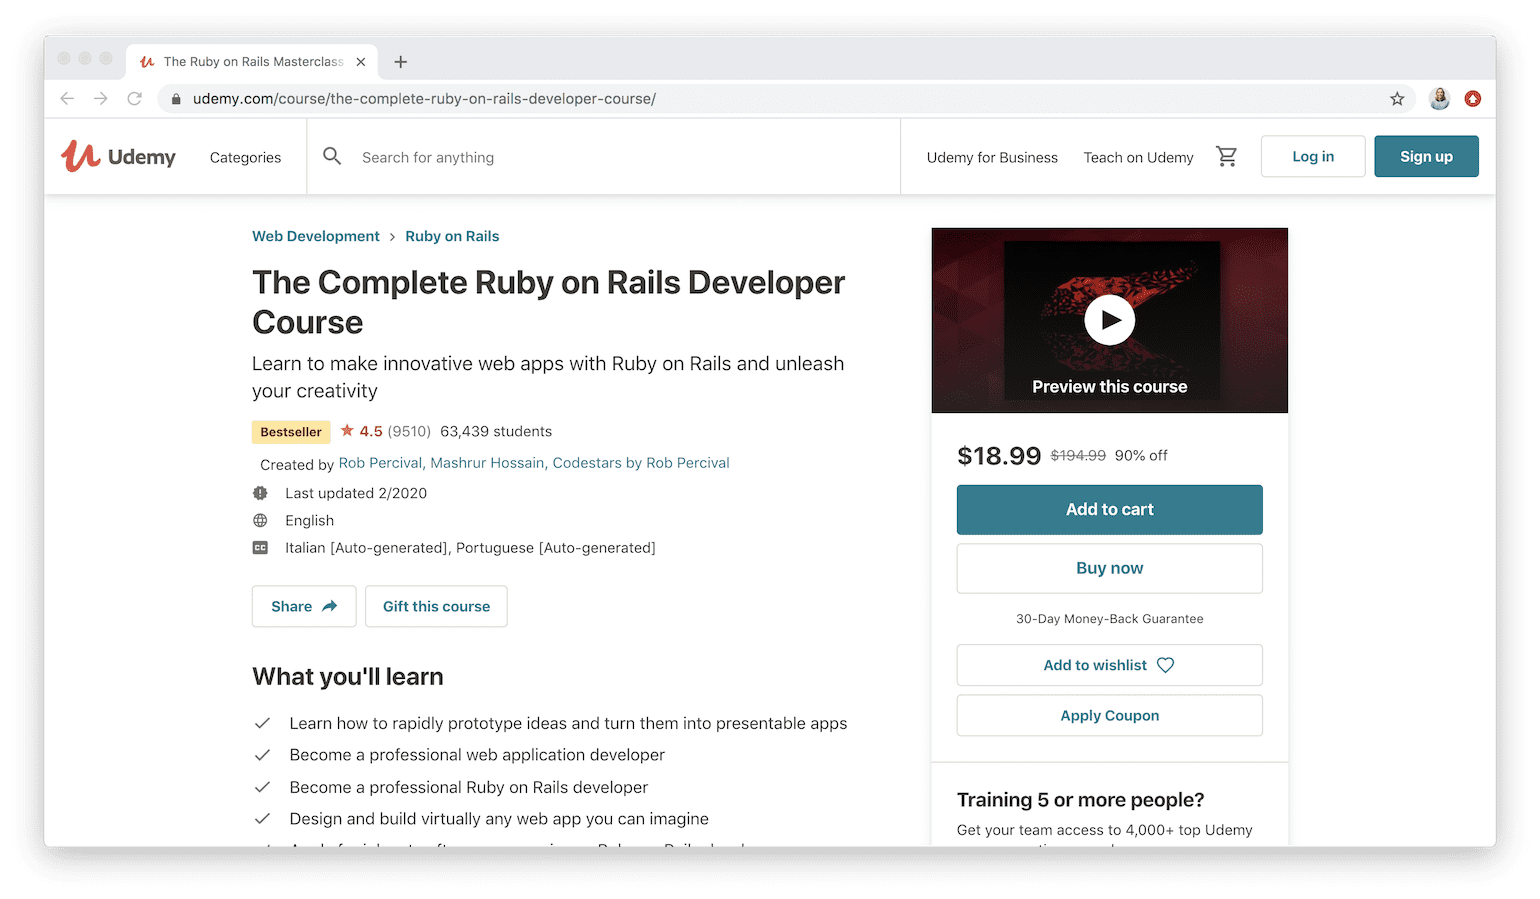 The Complete Ruby on Rails Developer Course on Udemy